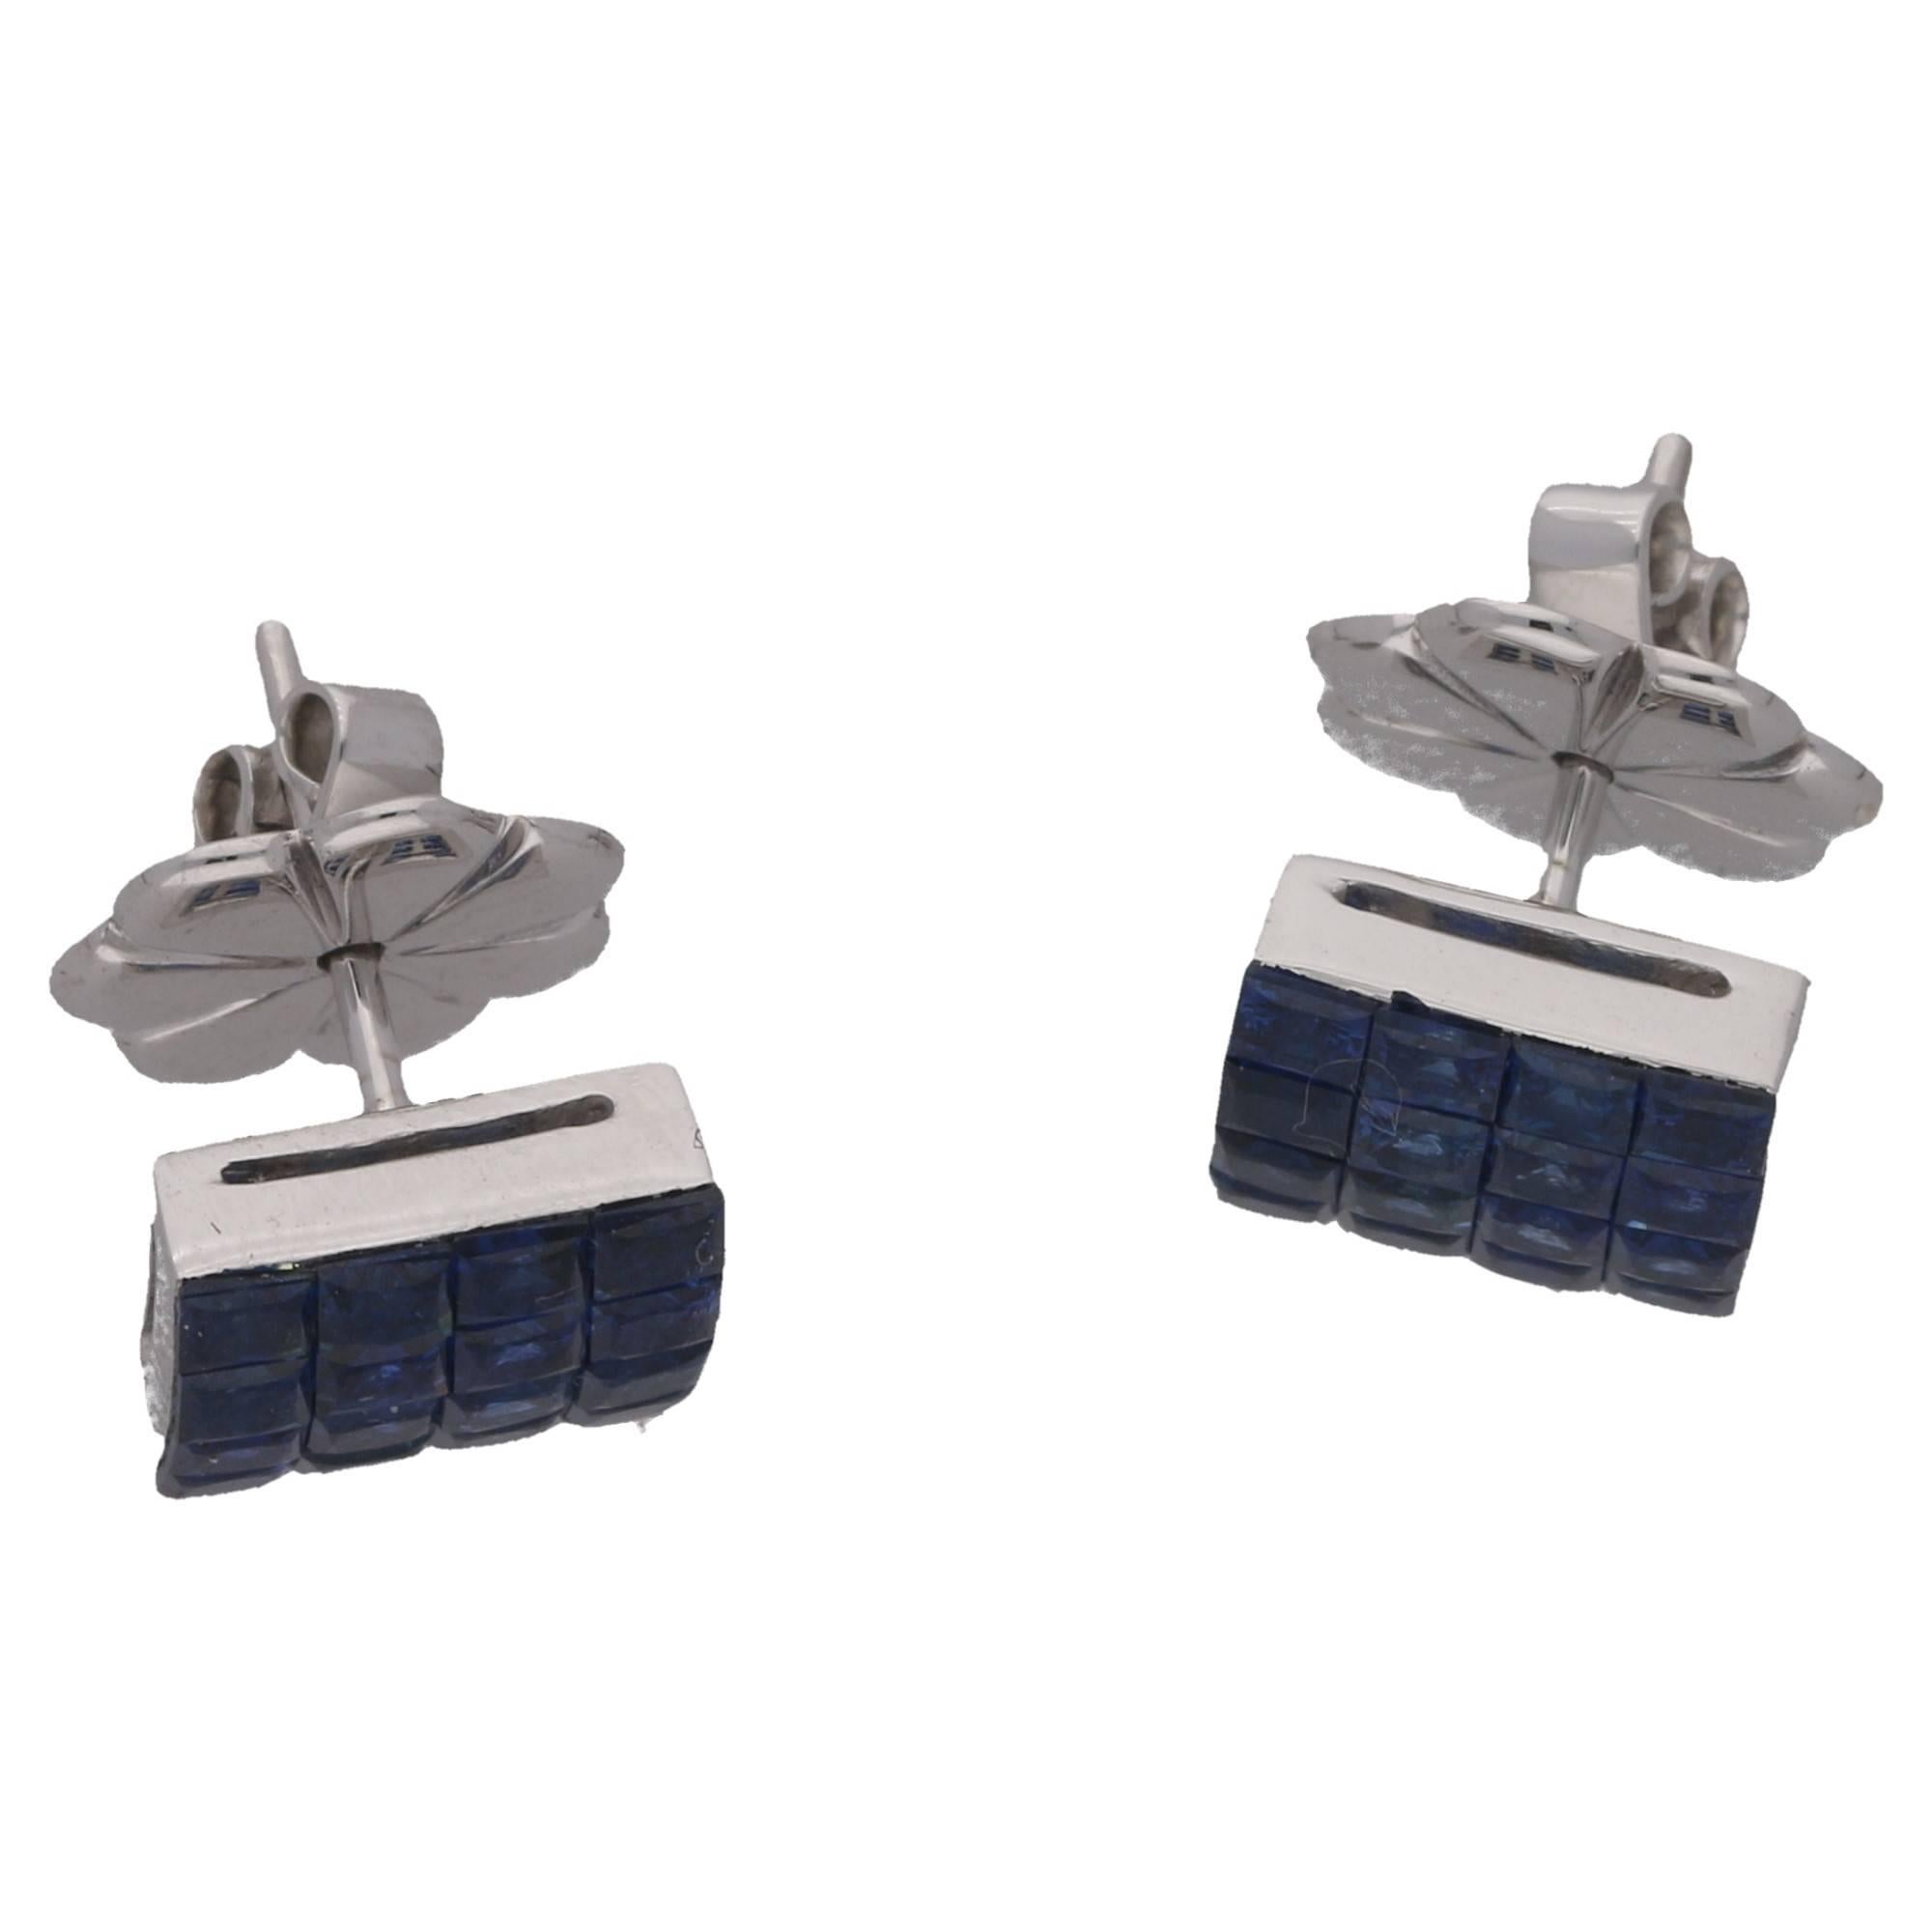 A neat pair of  invisibly set sapphire earrings. The magic is that the stones appear to be suspended with only the outer setting edge visible, in fact each stone is immaculately set. Earrings measure 10mm x 10mm. Total sapphire weight: 4.62 carats.